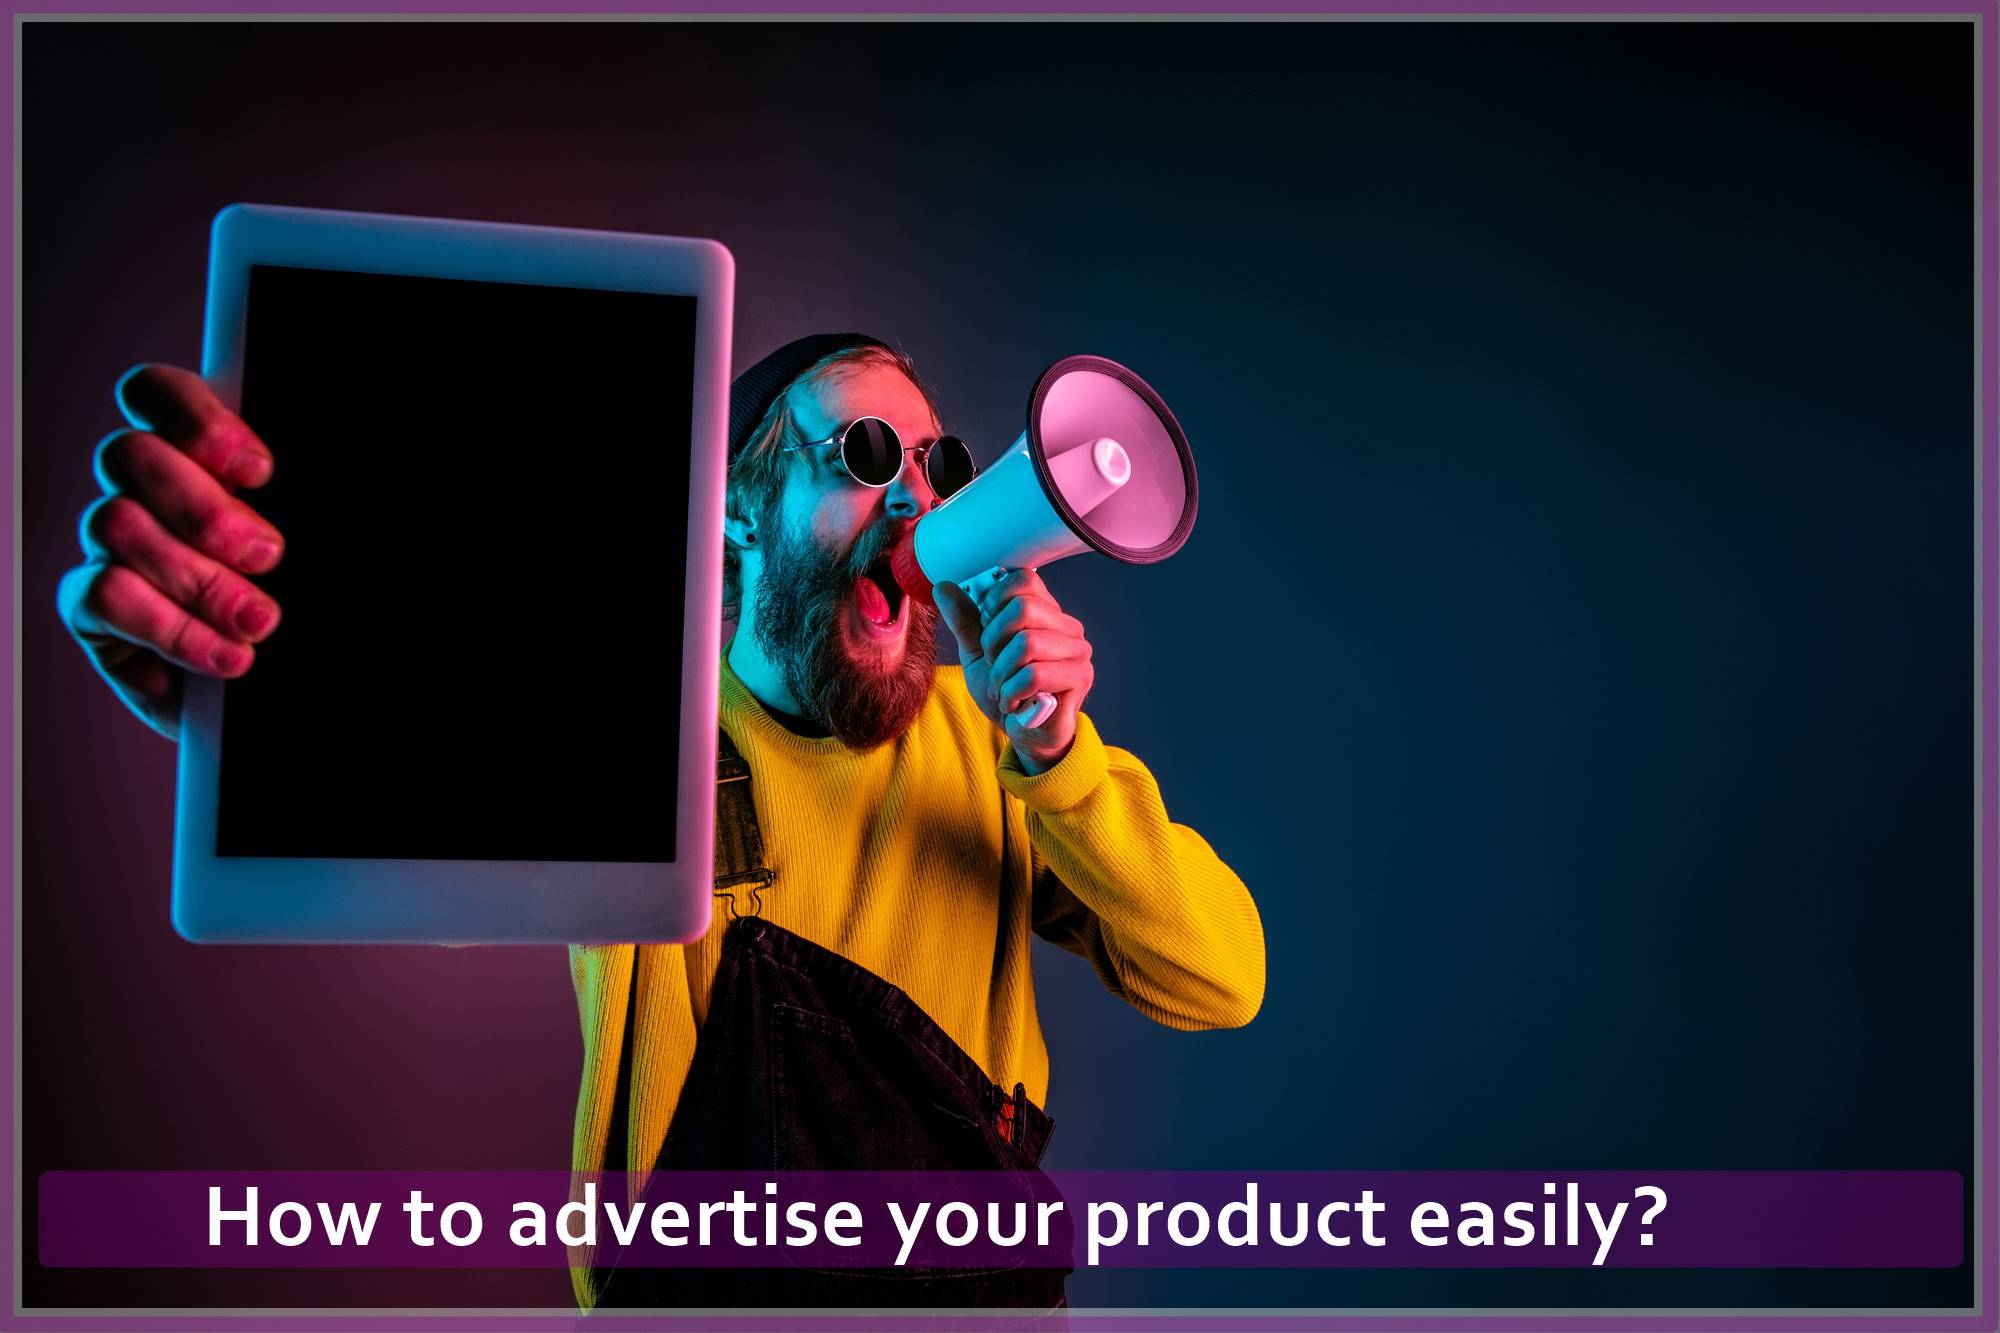 How to advertise your product easily?